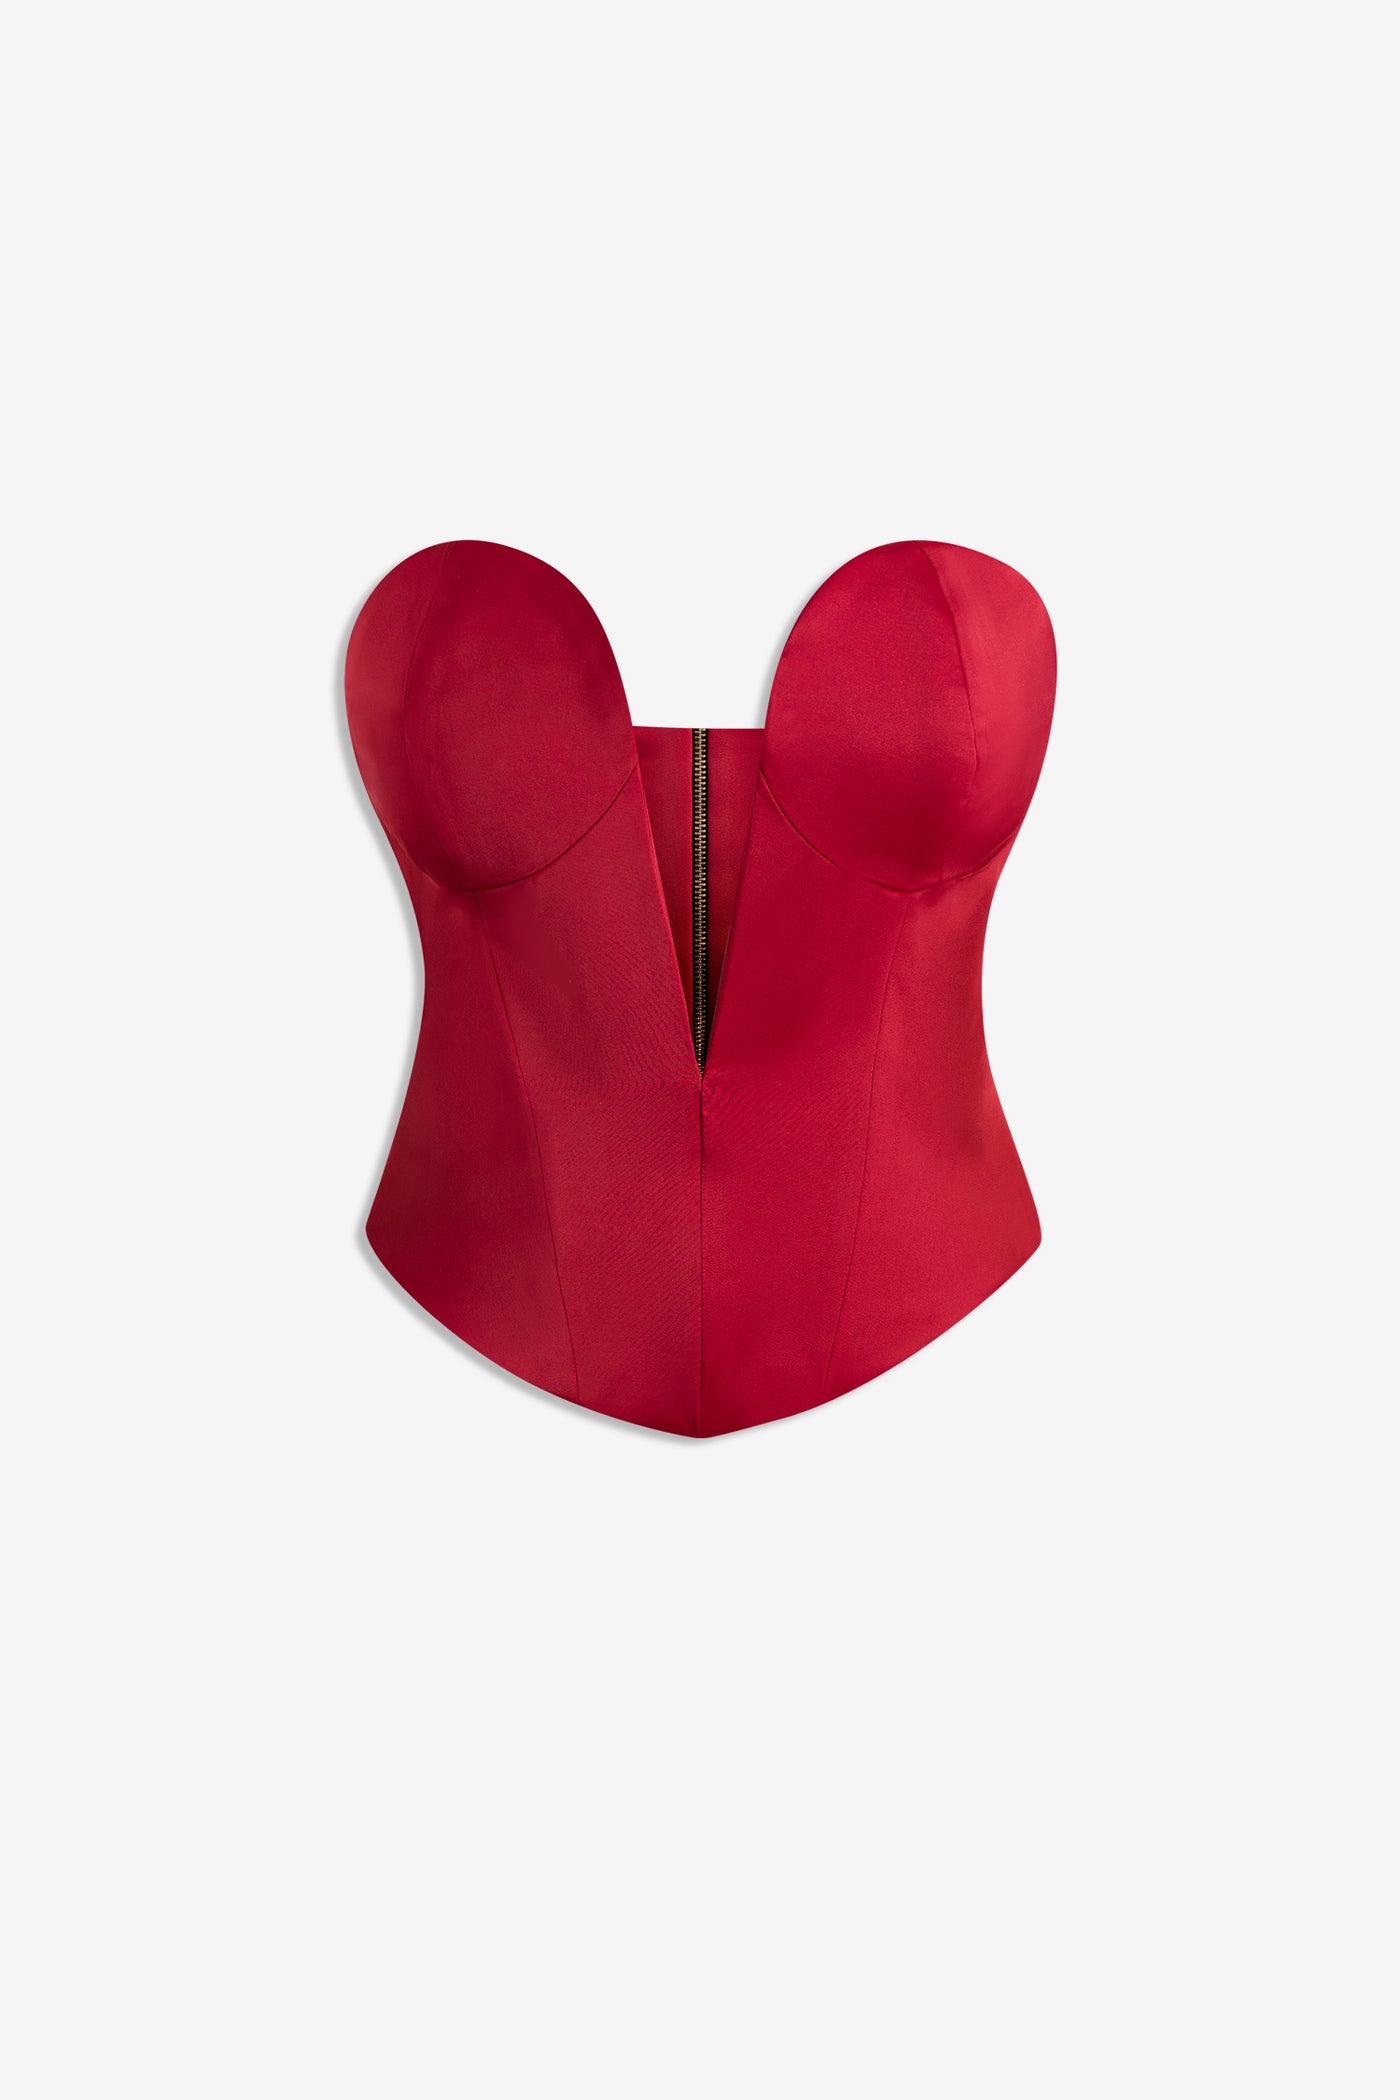 FENTY TOP - RED MND group_fentytop, party, sale, top